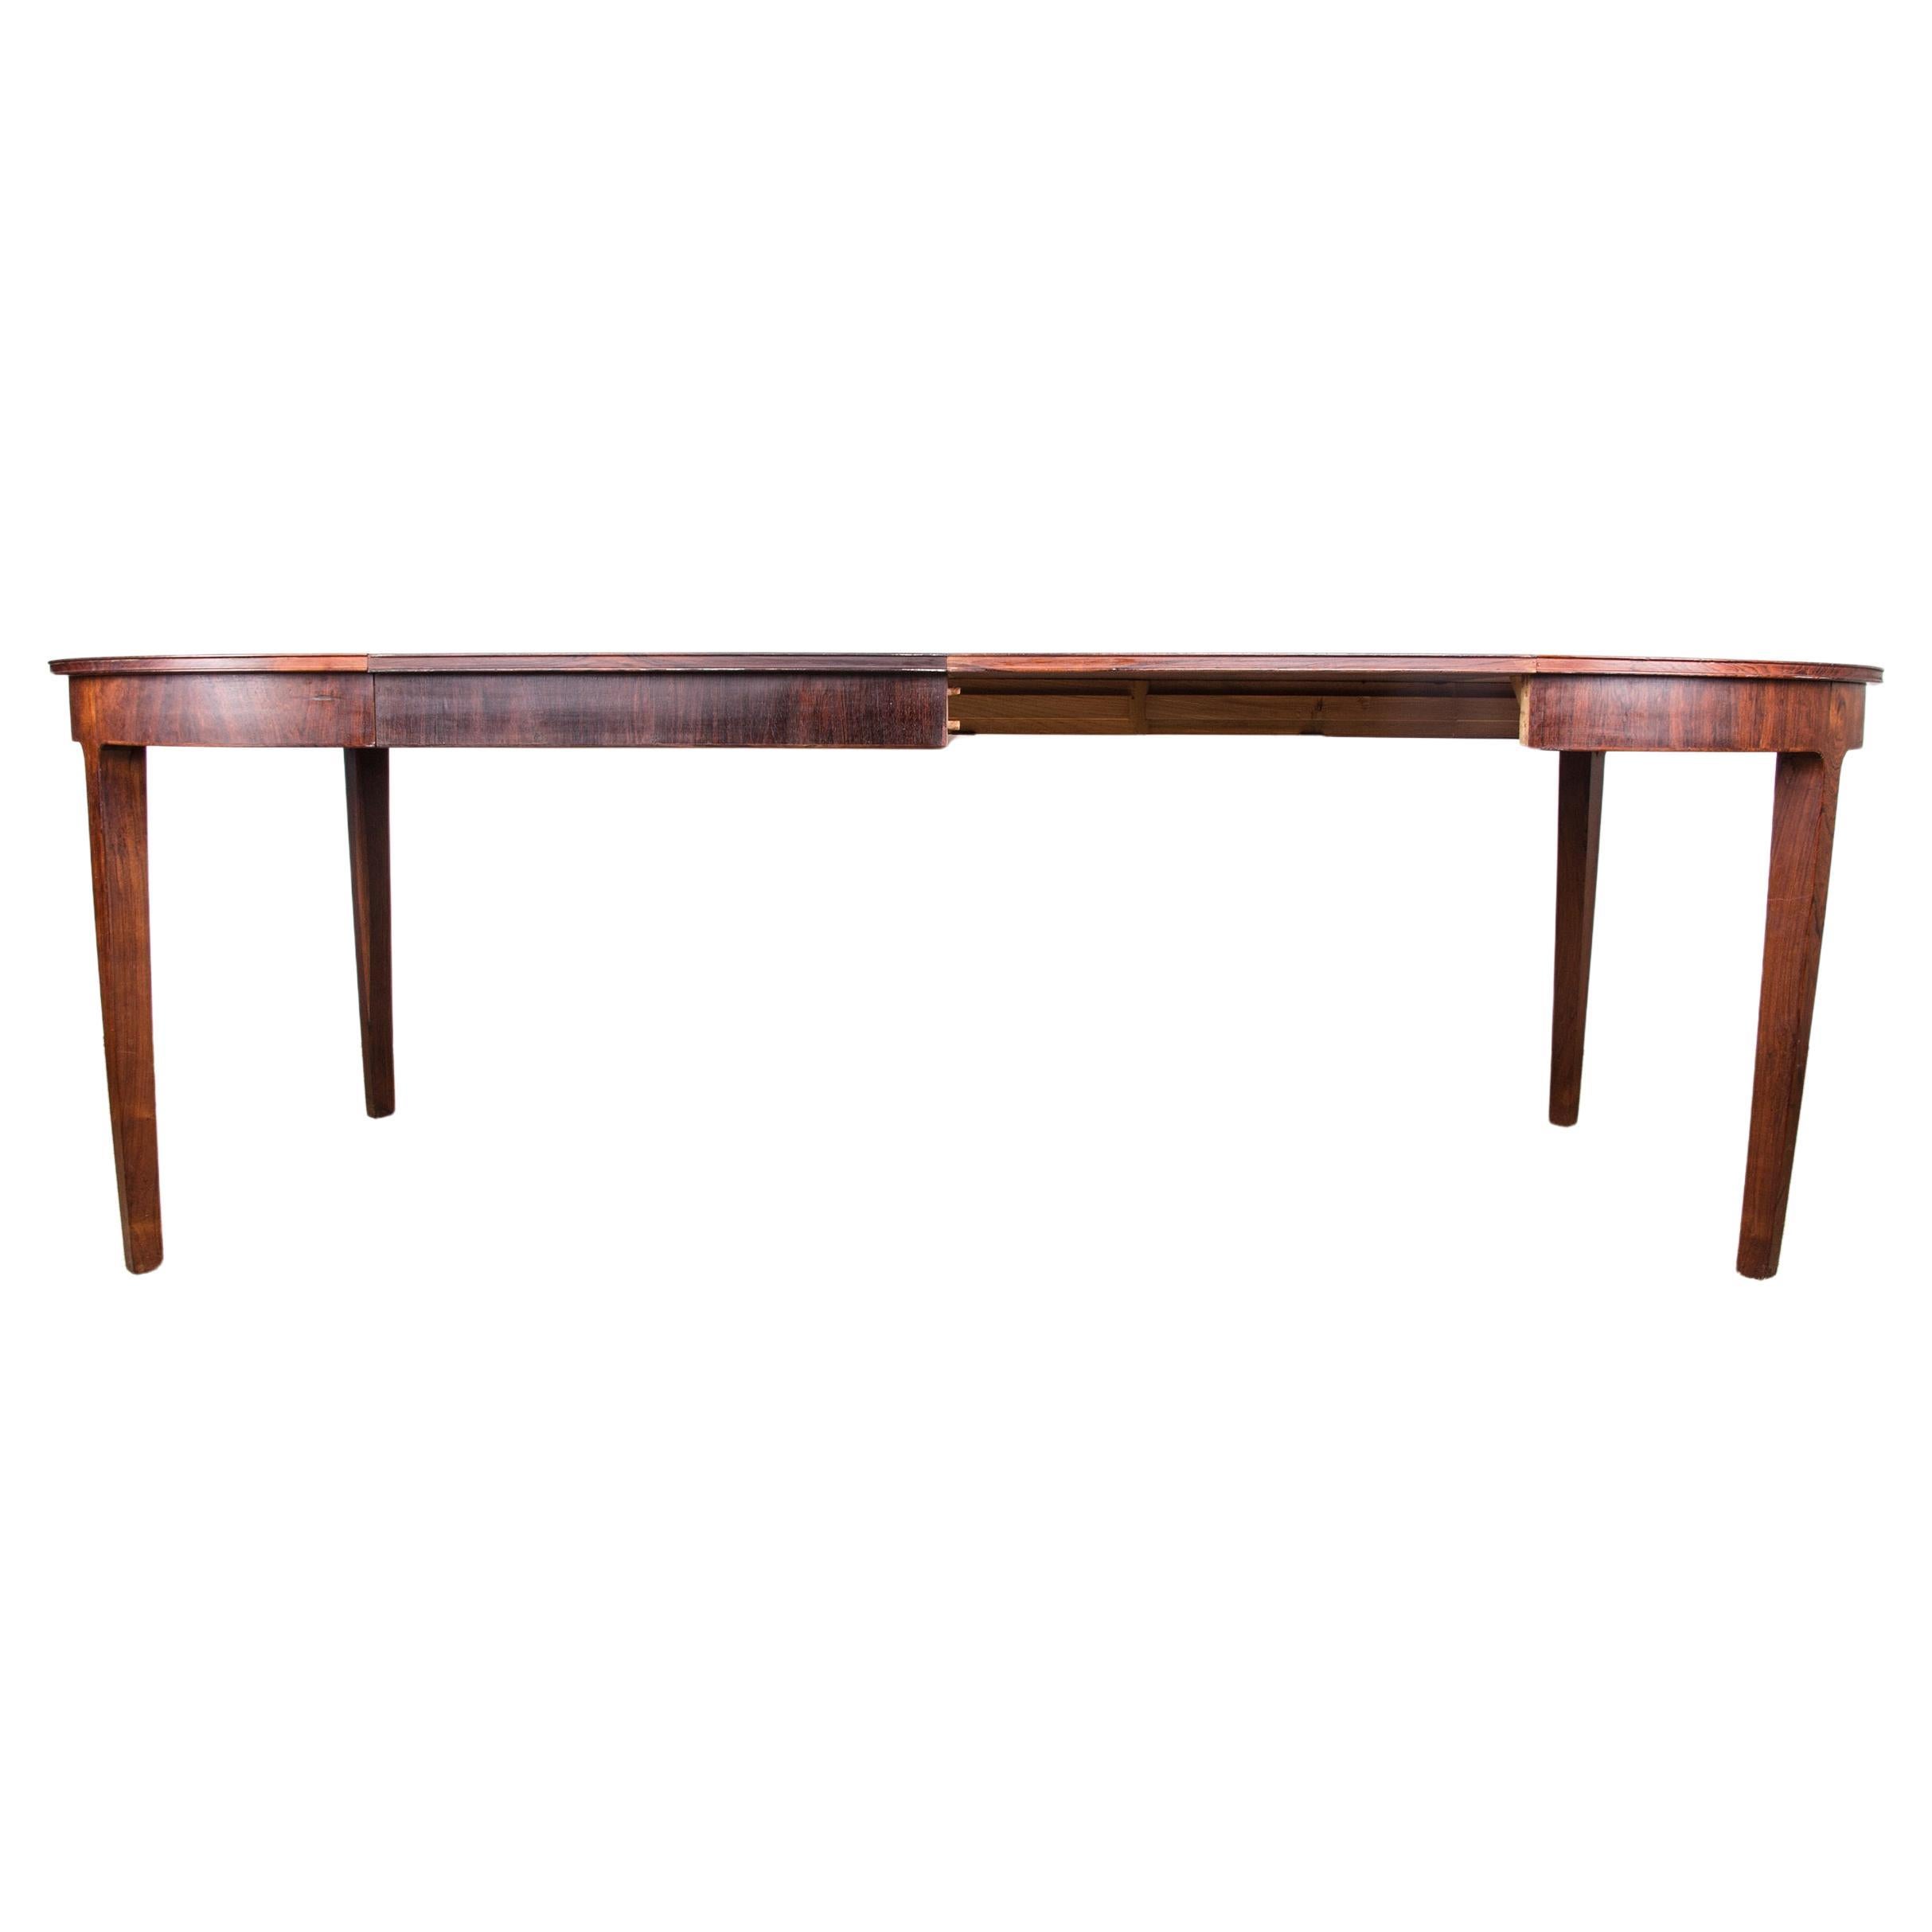 Large Danish extendable dining table in Rosewood by Hugo Frandsen for Spottrup.